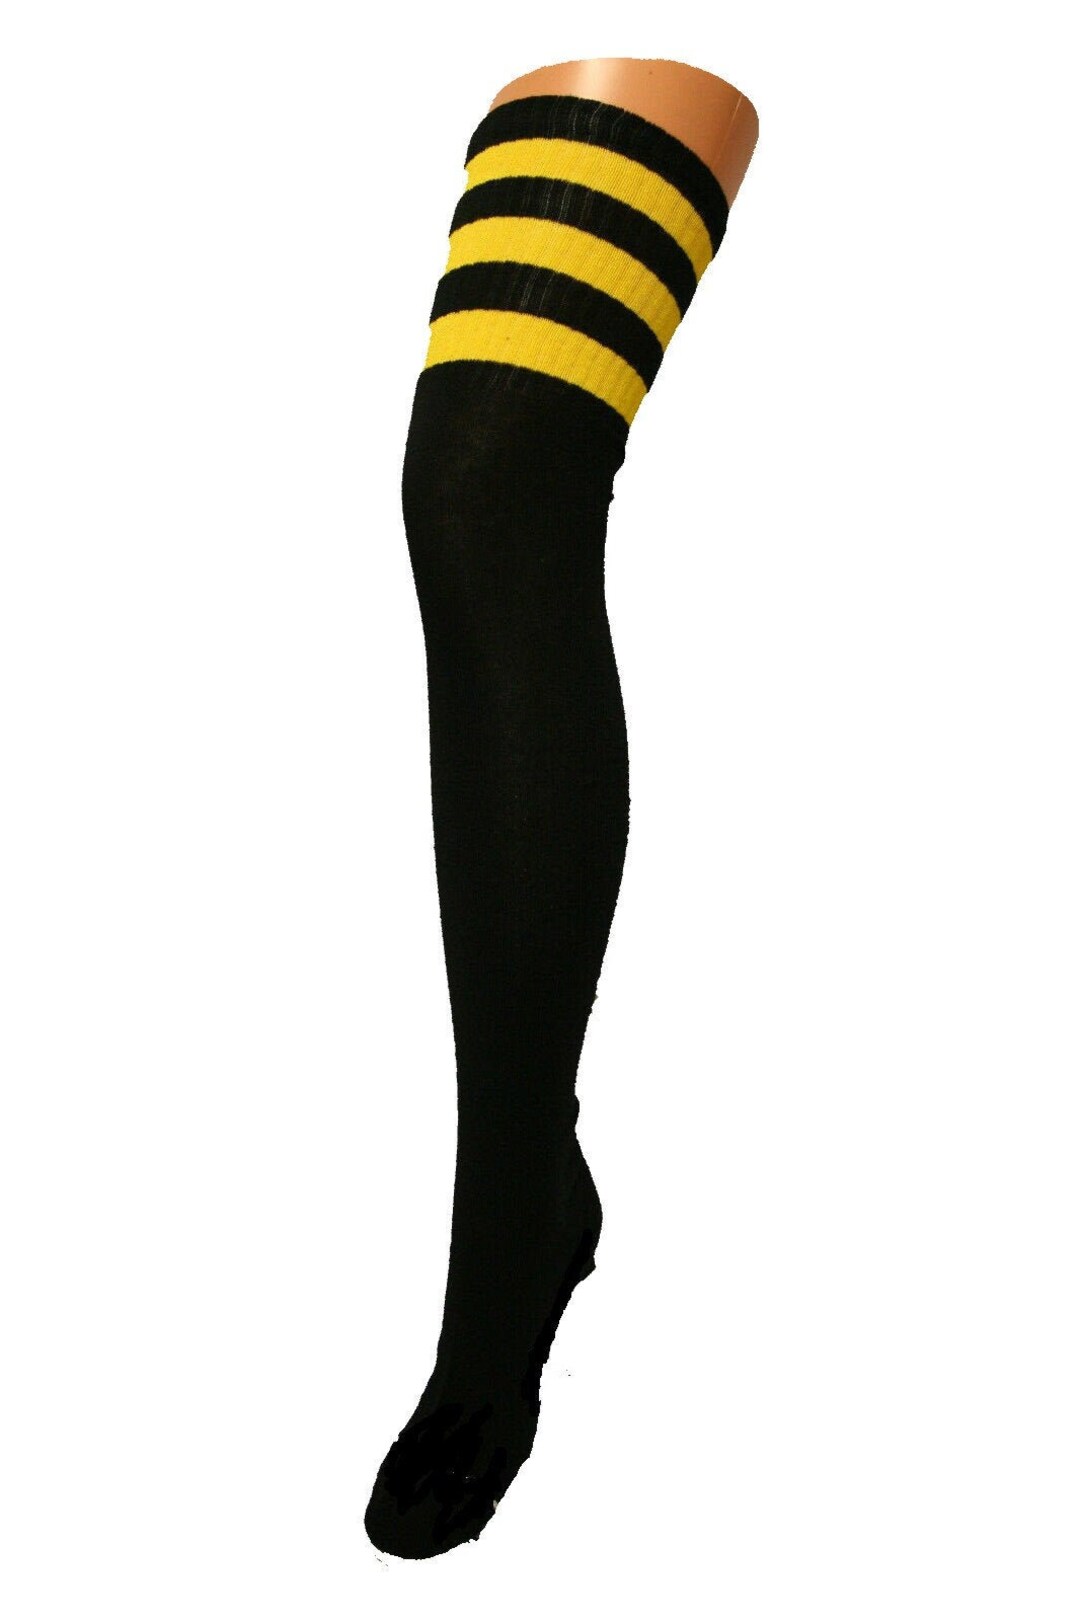 SPORTS ATHLETIC Cheerleader Thigh High Sock Tube Cotton Over - Etsy